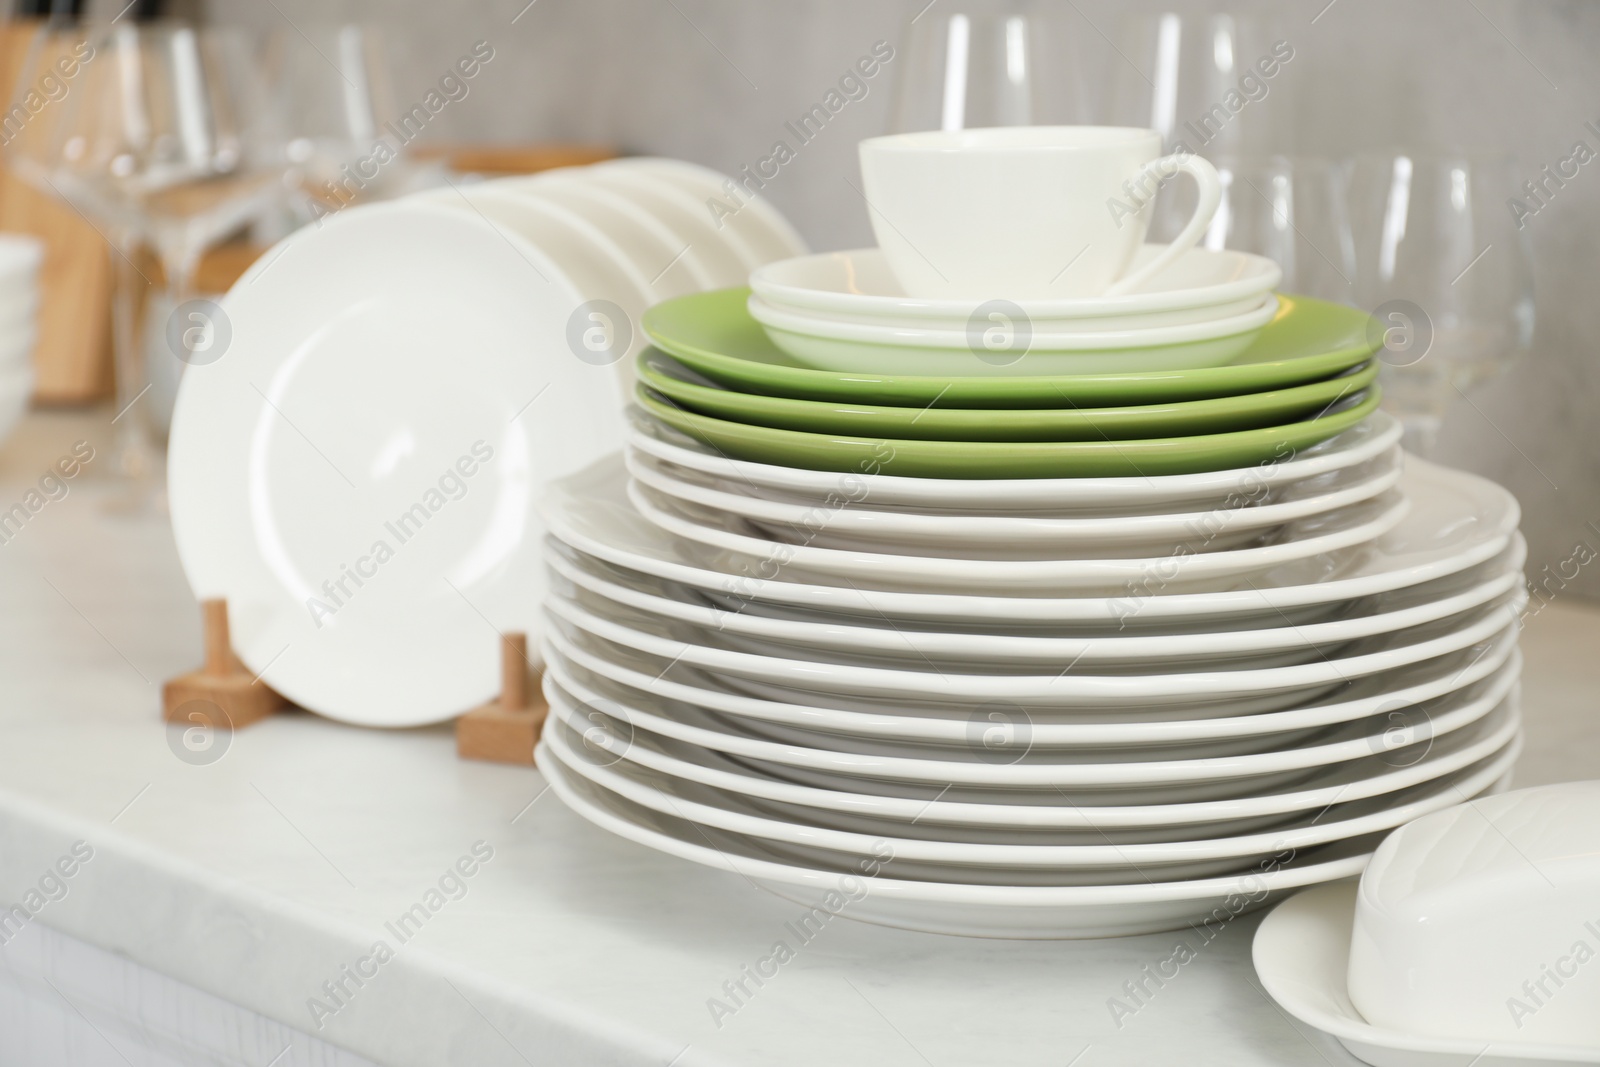 Photo of Clean plates, cup, glasses and butter dish on white countertop in kitchen